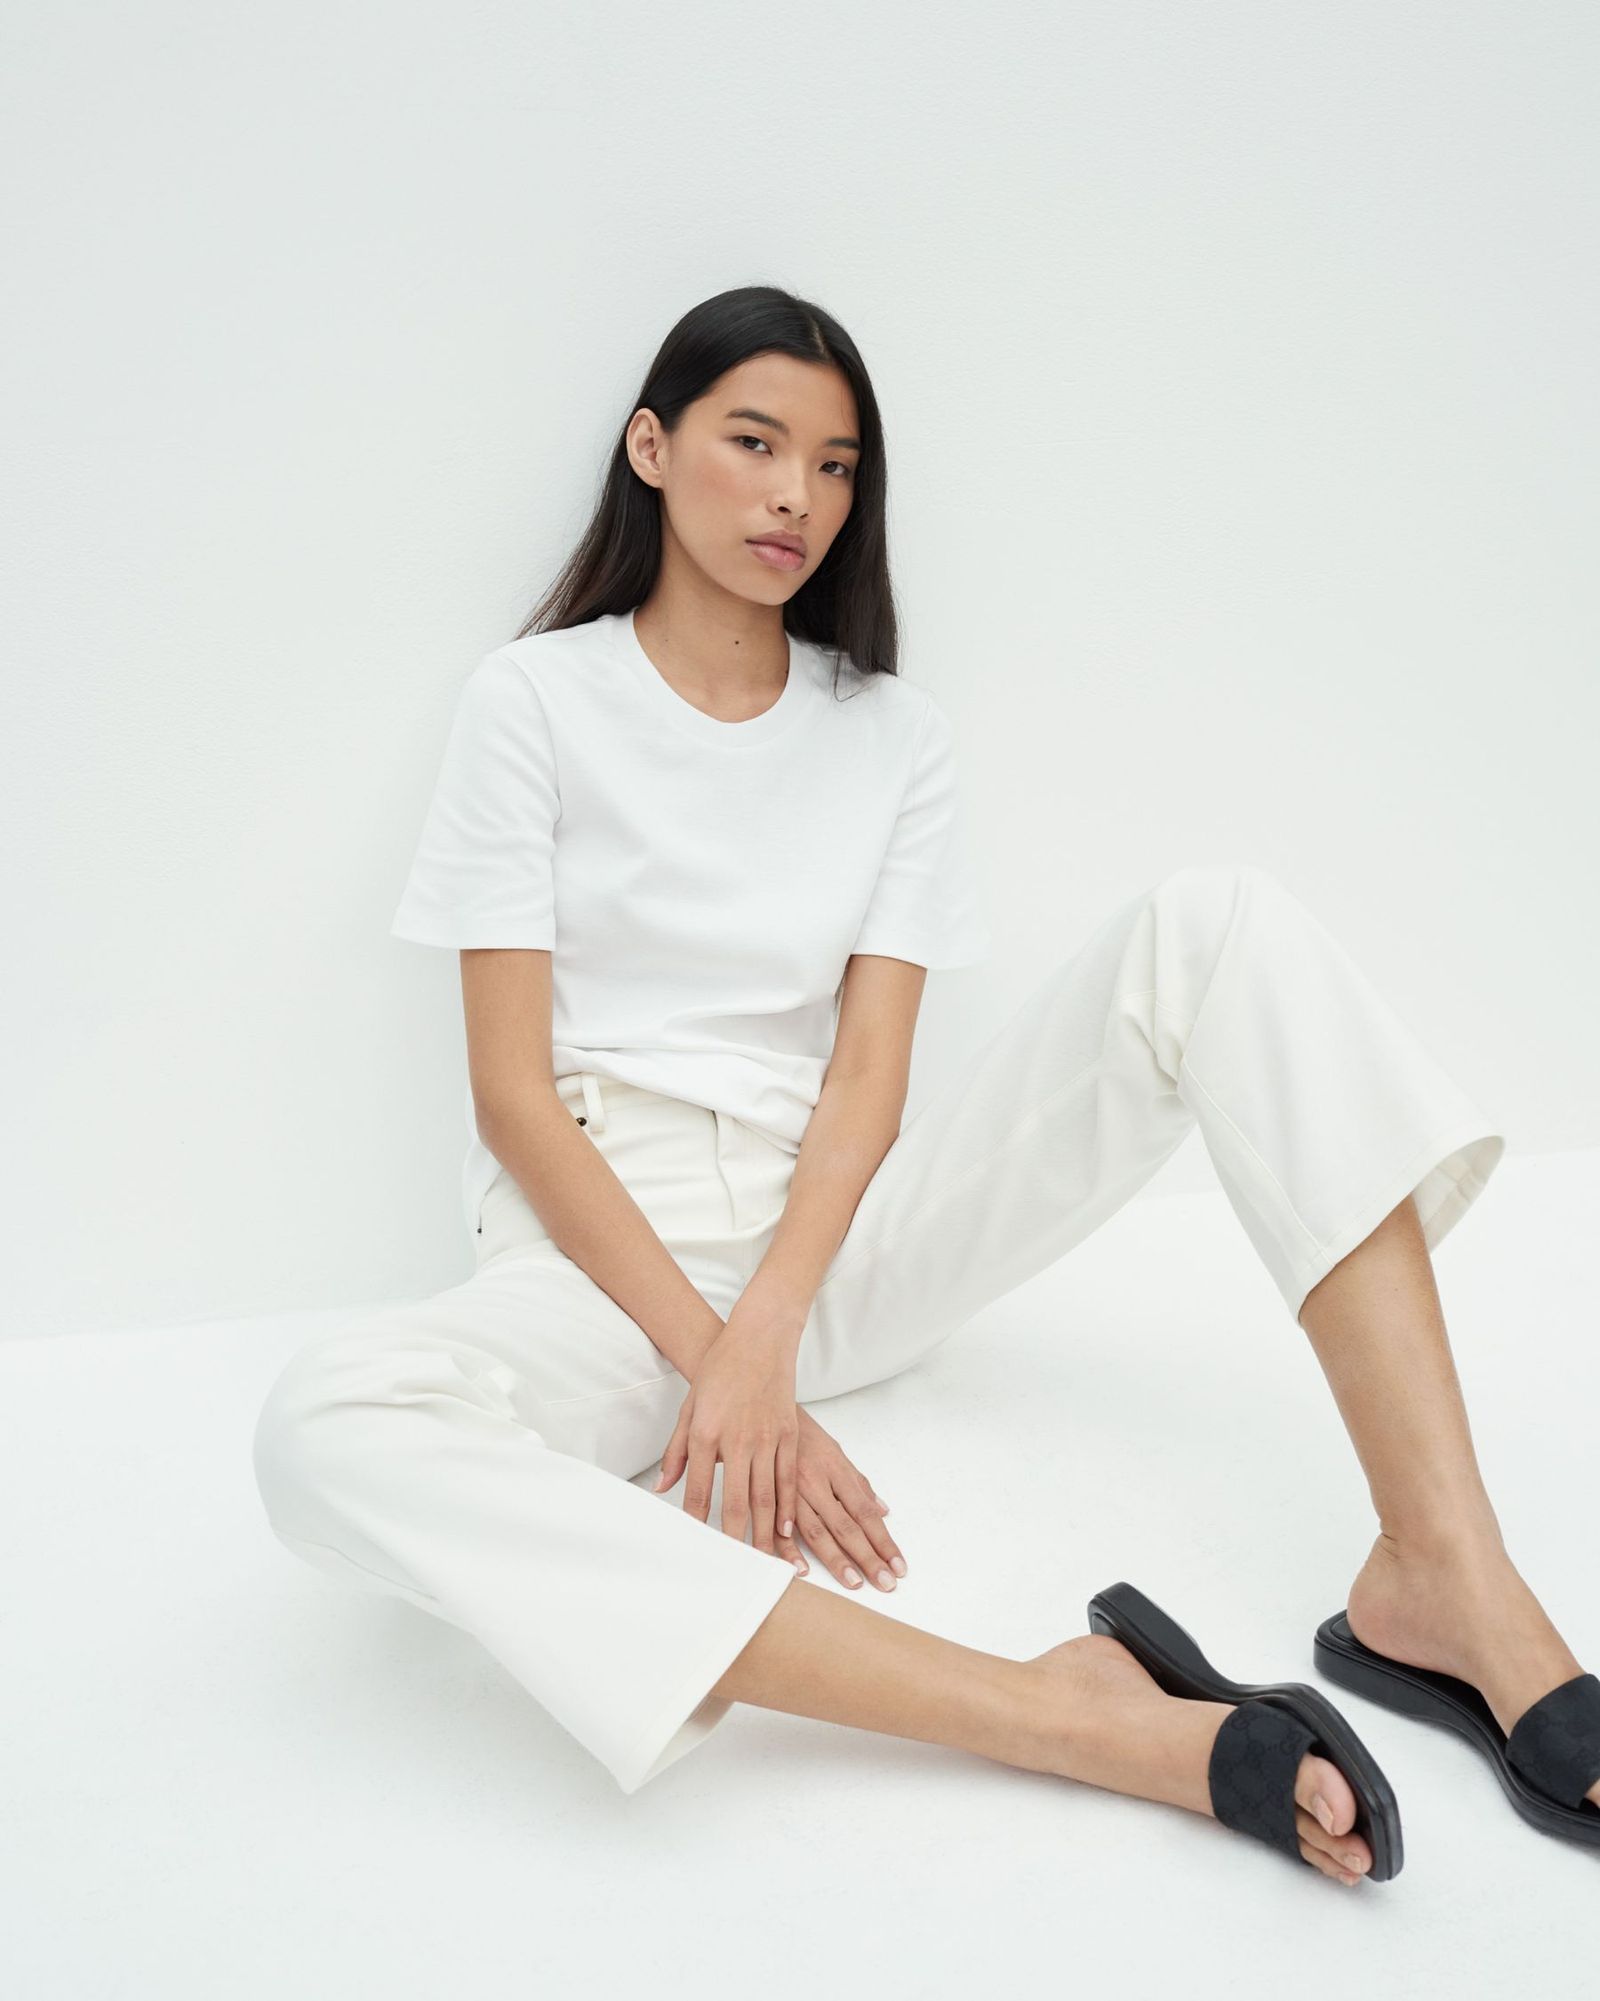 9 Best White T-Shirts for Women - Stylish White Tees for Women